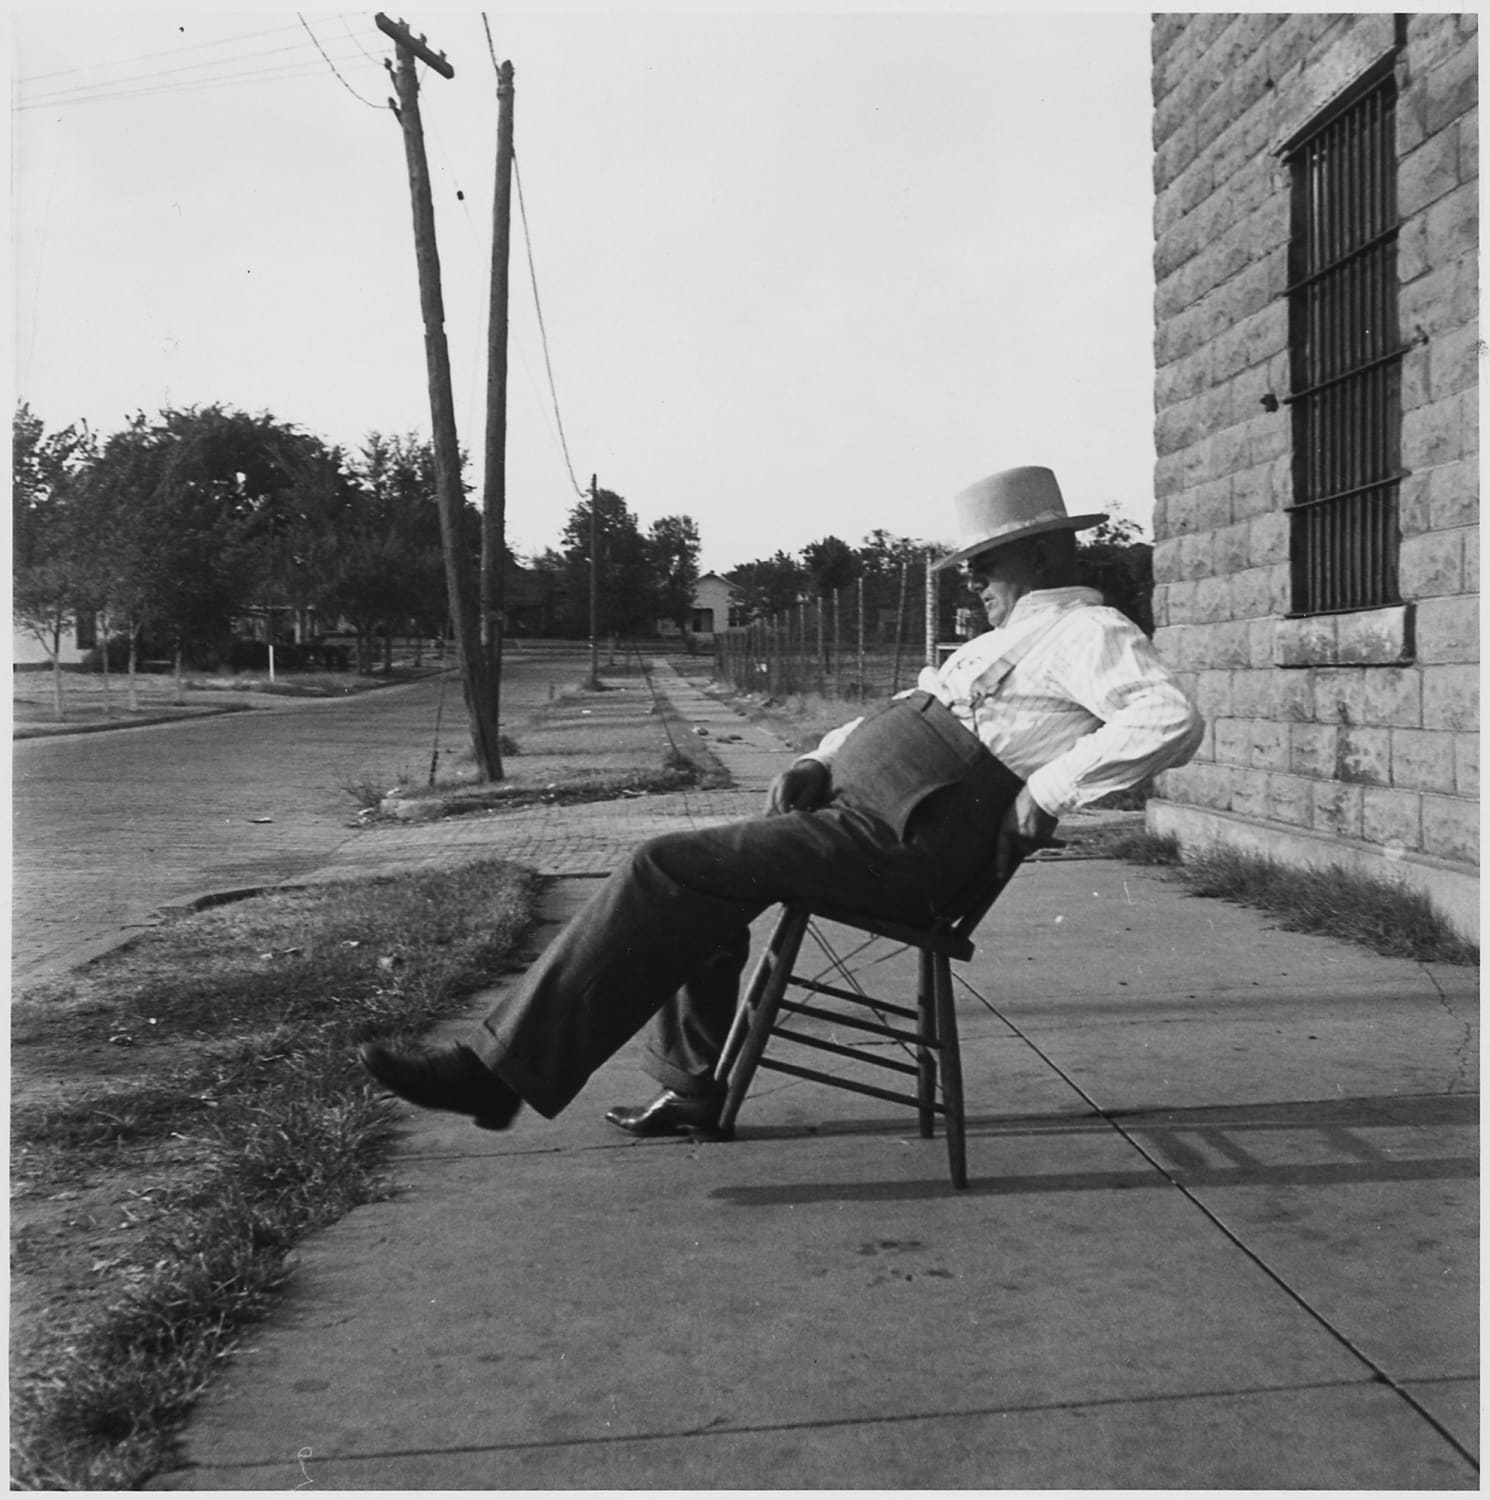 Sheriff of McAlester, Oklahoma, sitting in front of the jail, August 1936